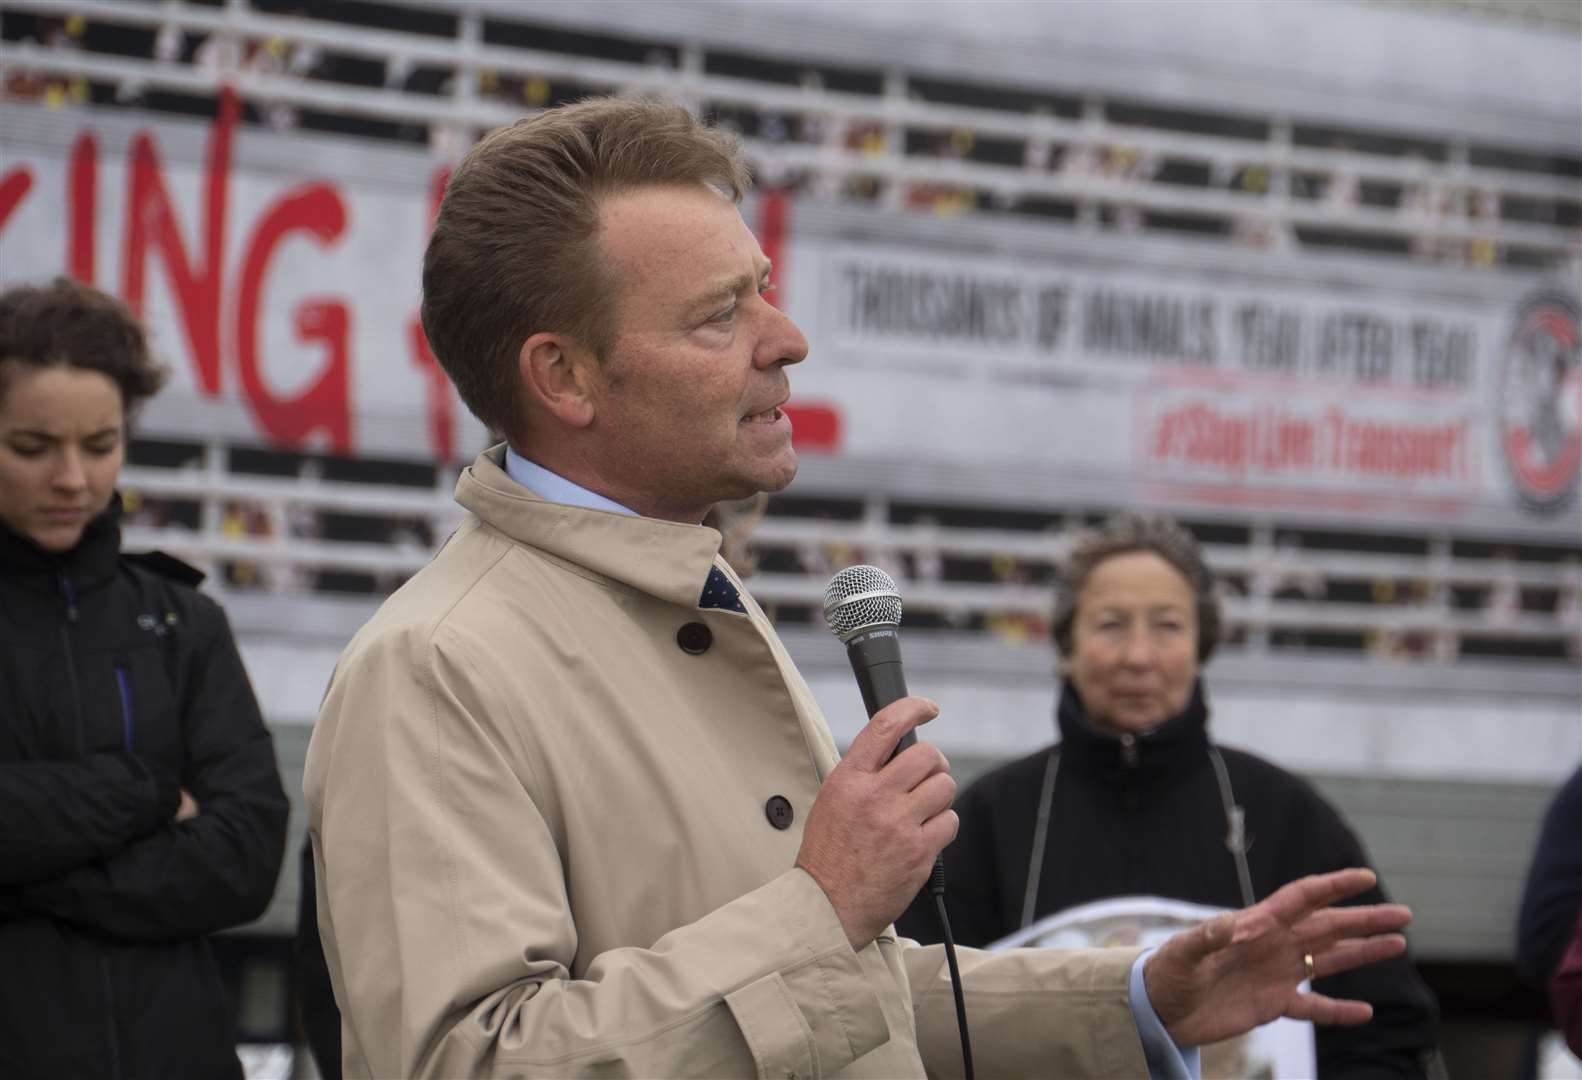 Craig Mackinlay at a stop live exports rally in Ramsgate